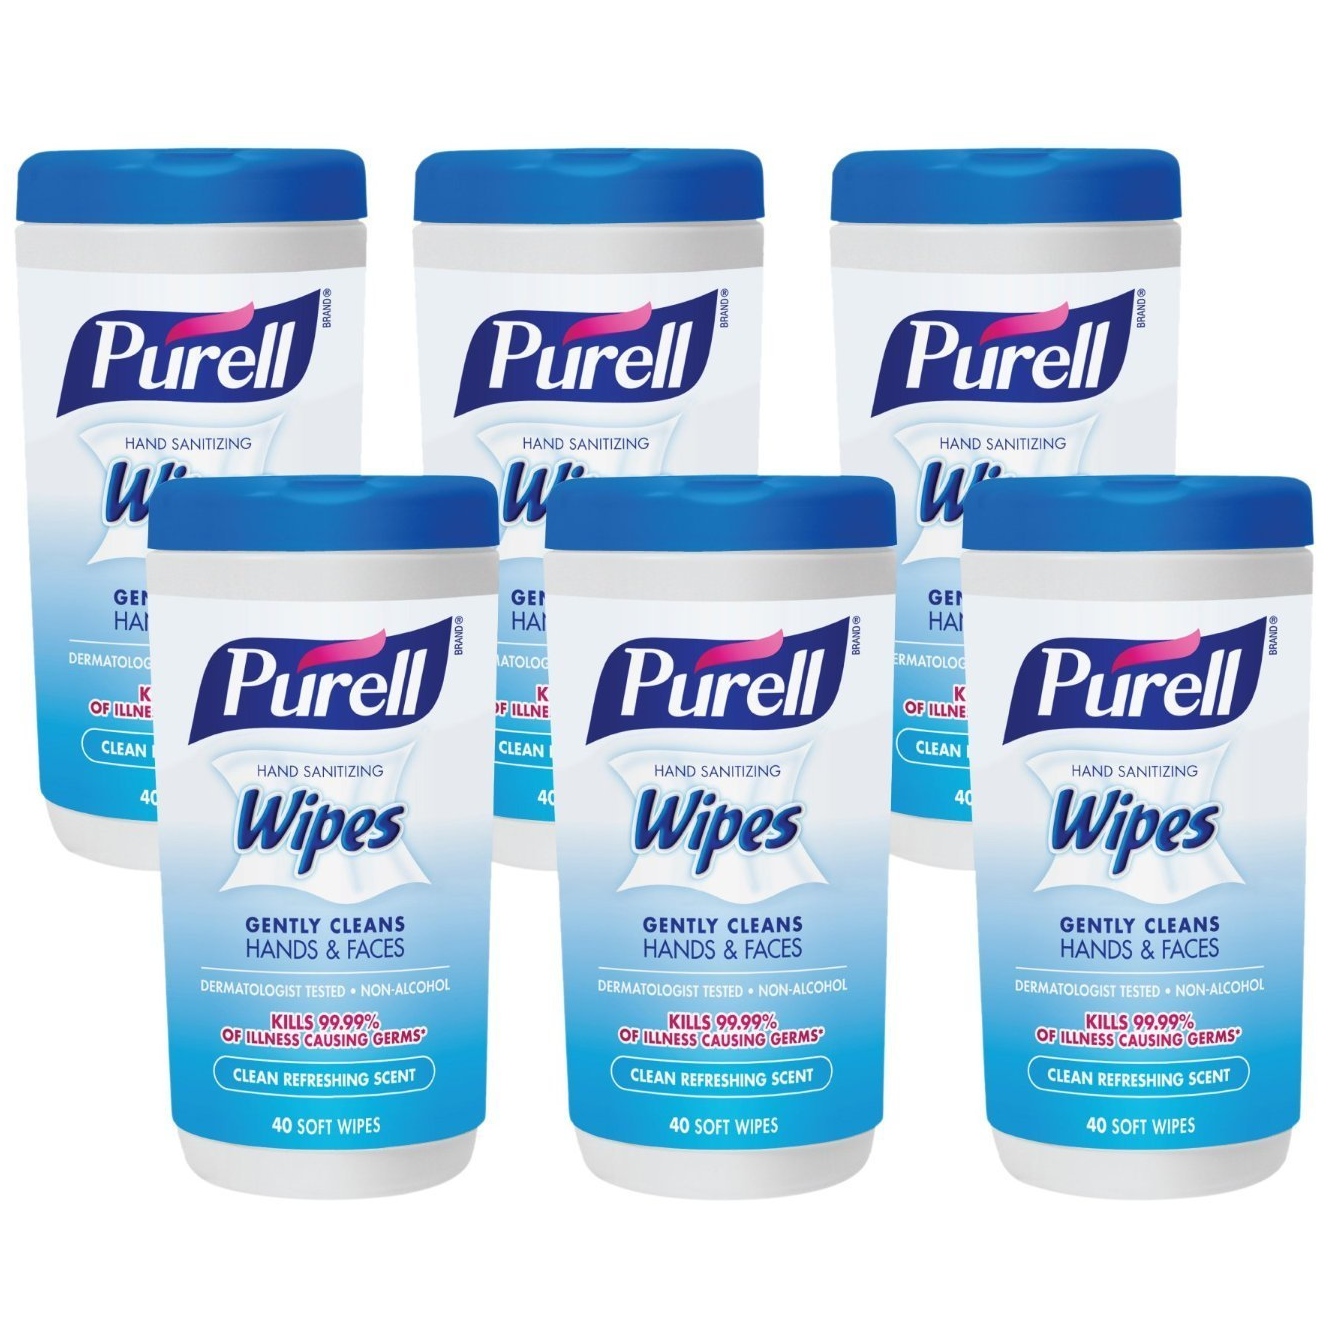 Amazon: Purrell Hand Sanitizing Wipes, Clean Refreshing Scent, 40 Count Canister (Pack of 6) Just $11.38!